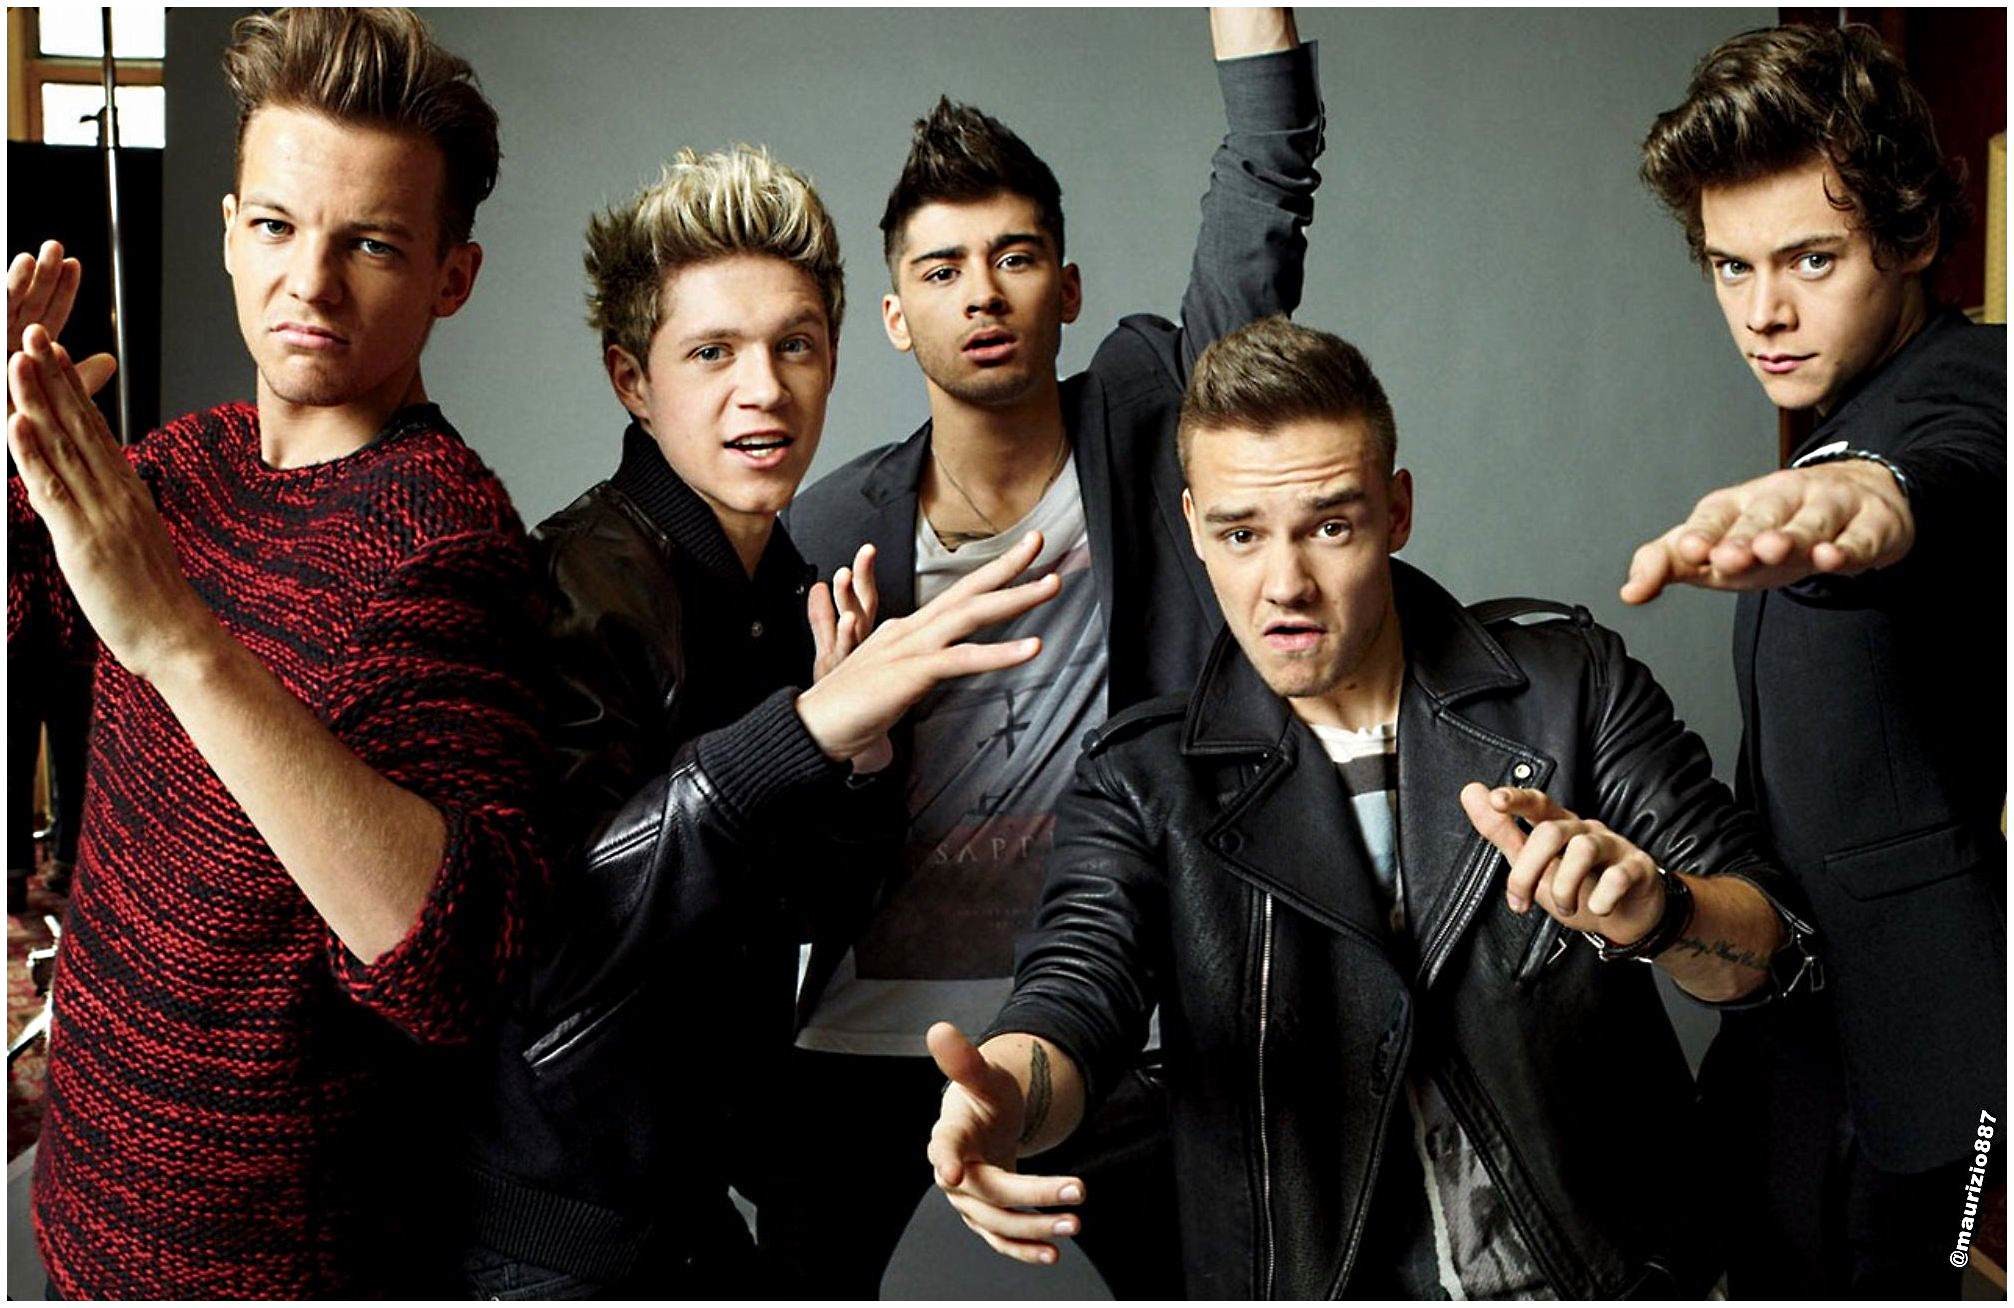 2014x1308 Music One Direction High Definition Wallpaper 1308x2014